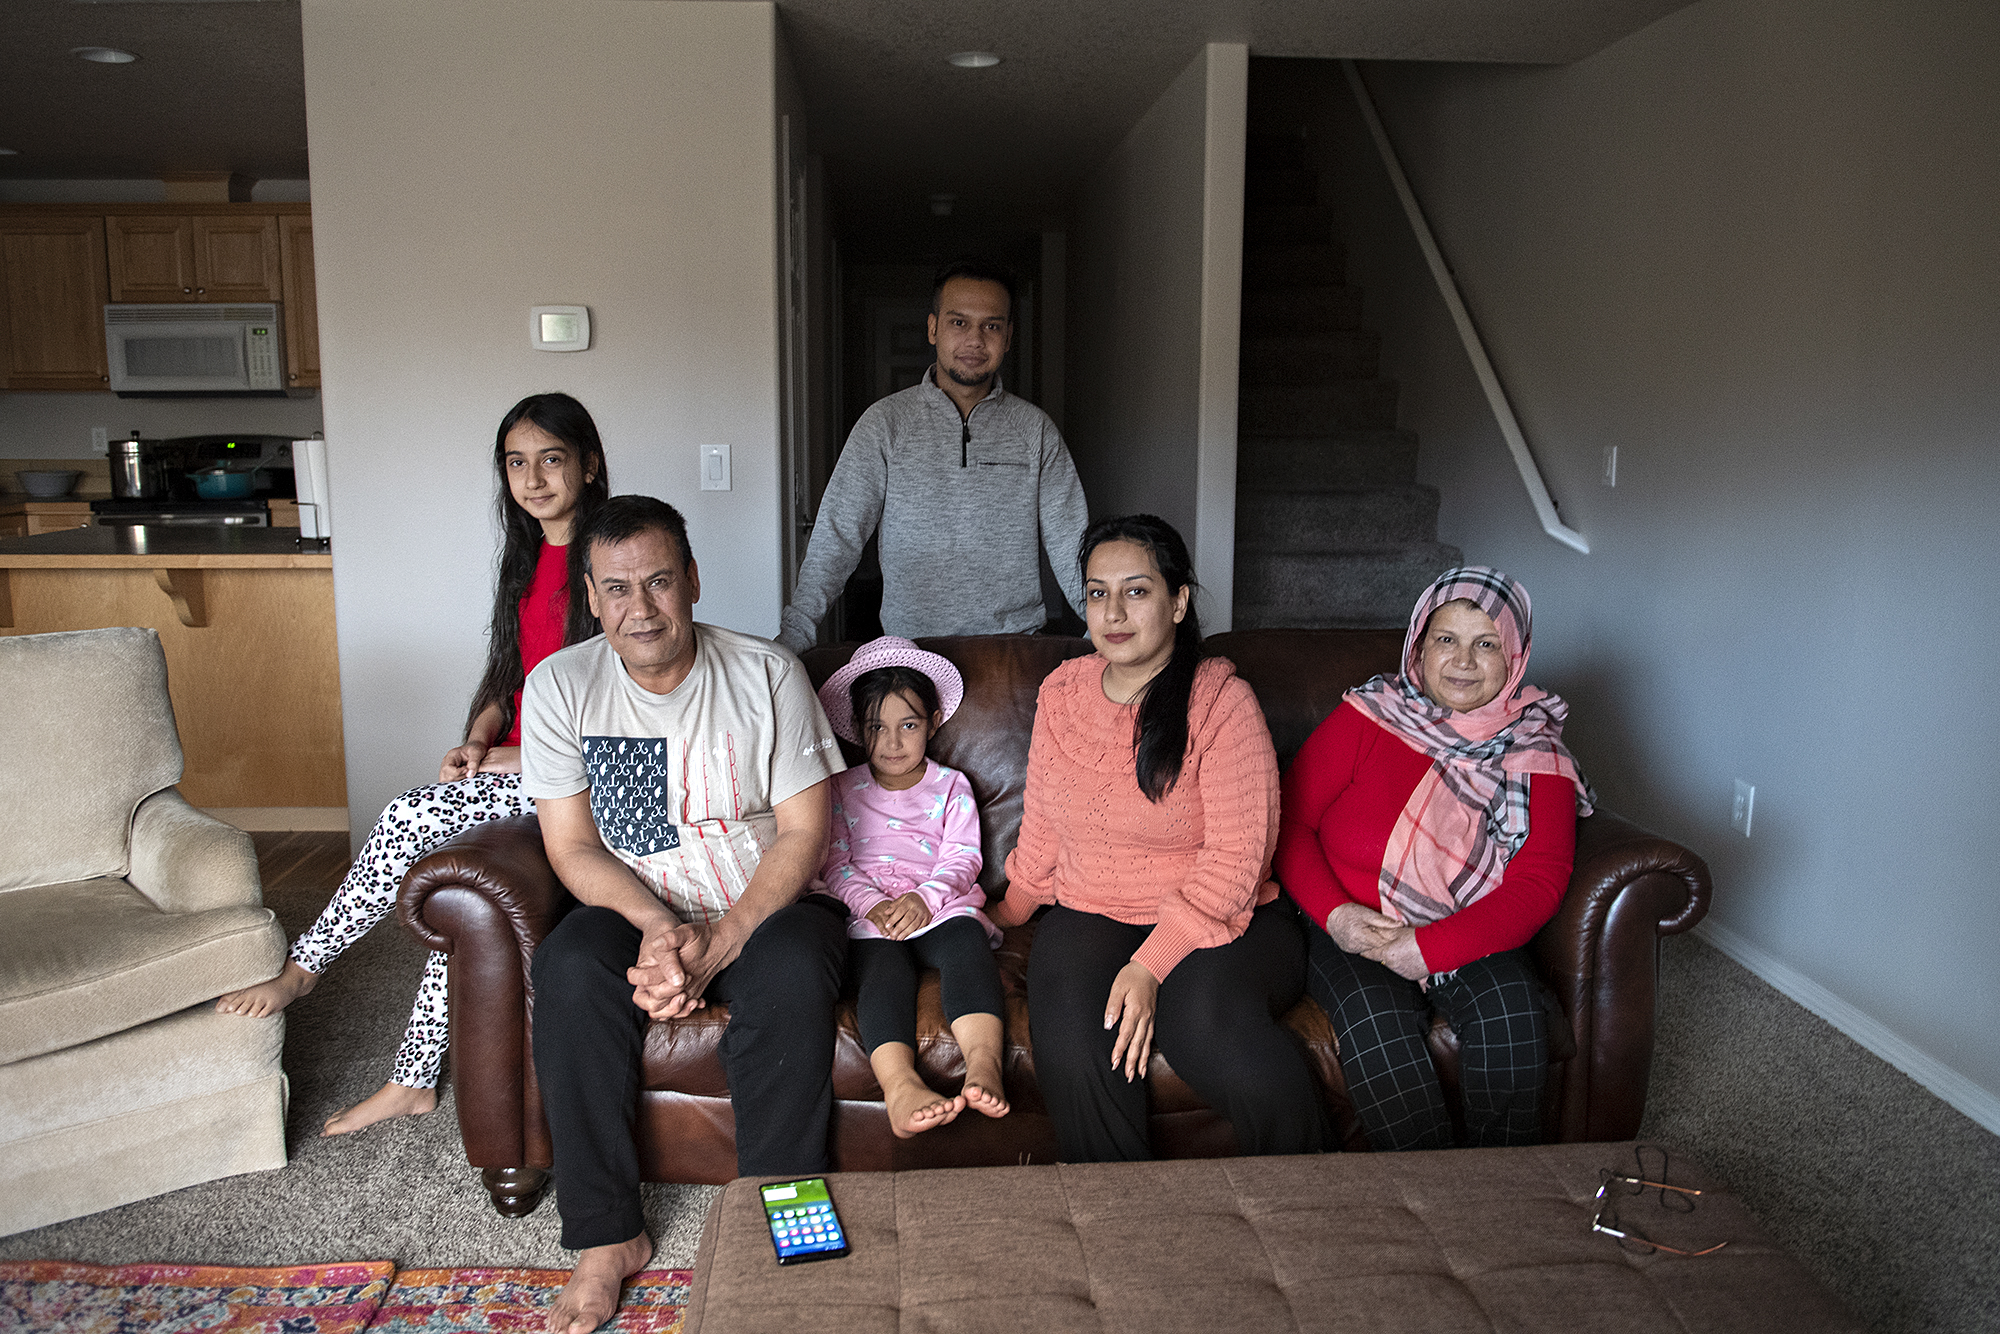 Members of the Azizpour family — refugees from Kabul, Afghanistan — are restarting their lives in Clark County. “Every morning is a surprise,” said Maryam Azizpour, 30, second from right. With Maryam at the family’s Hazel Dell rental are her daughter Marwa Azizpour, 10, far left; father Mohammad Ismail Rezayee; daughter Murwarid Azizpour, 6; brother Sajad Ibrahimi; and mother Sediqa Rustami.